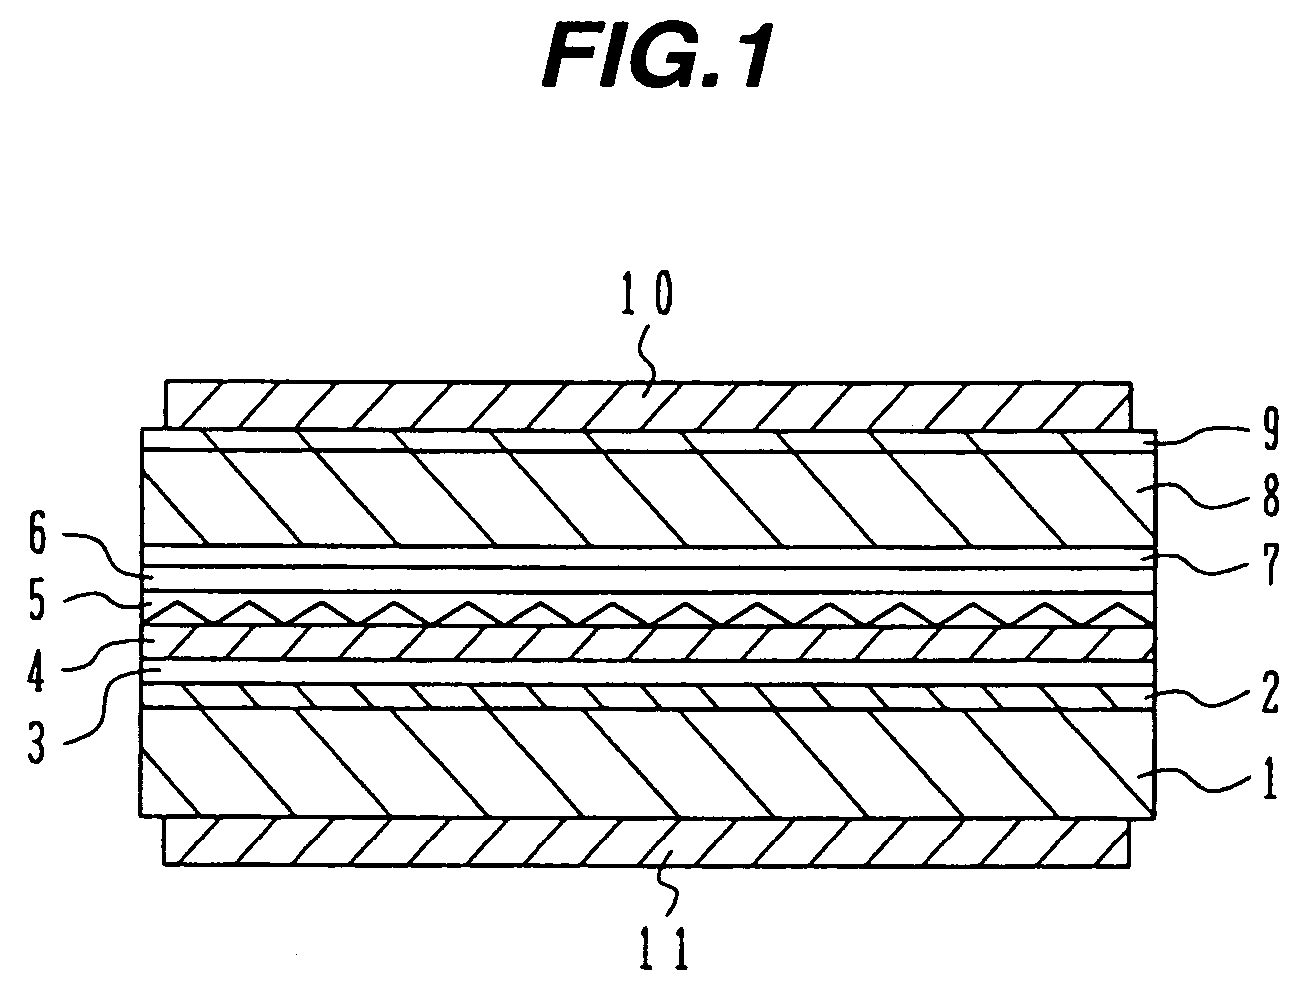 Distributed feedback semiconductor laser